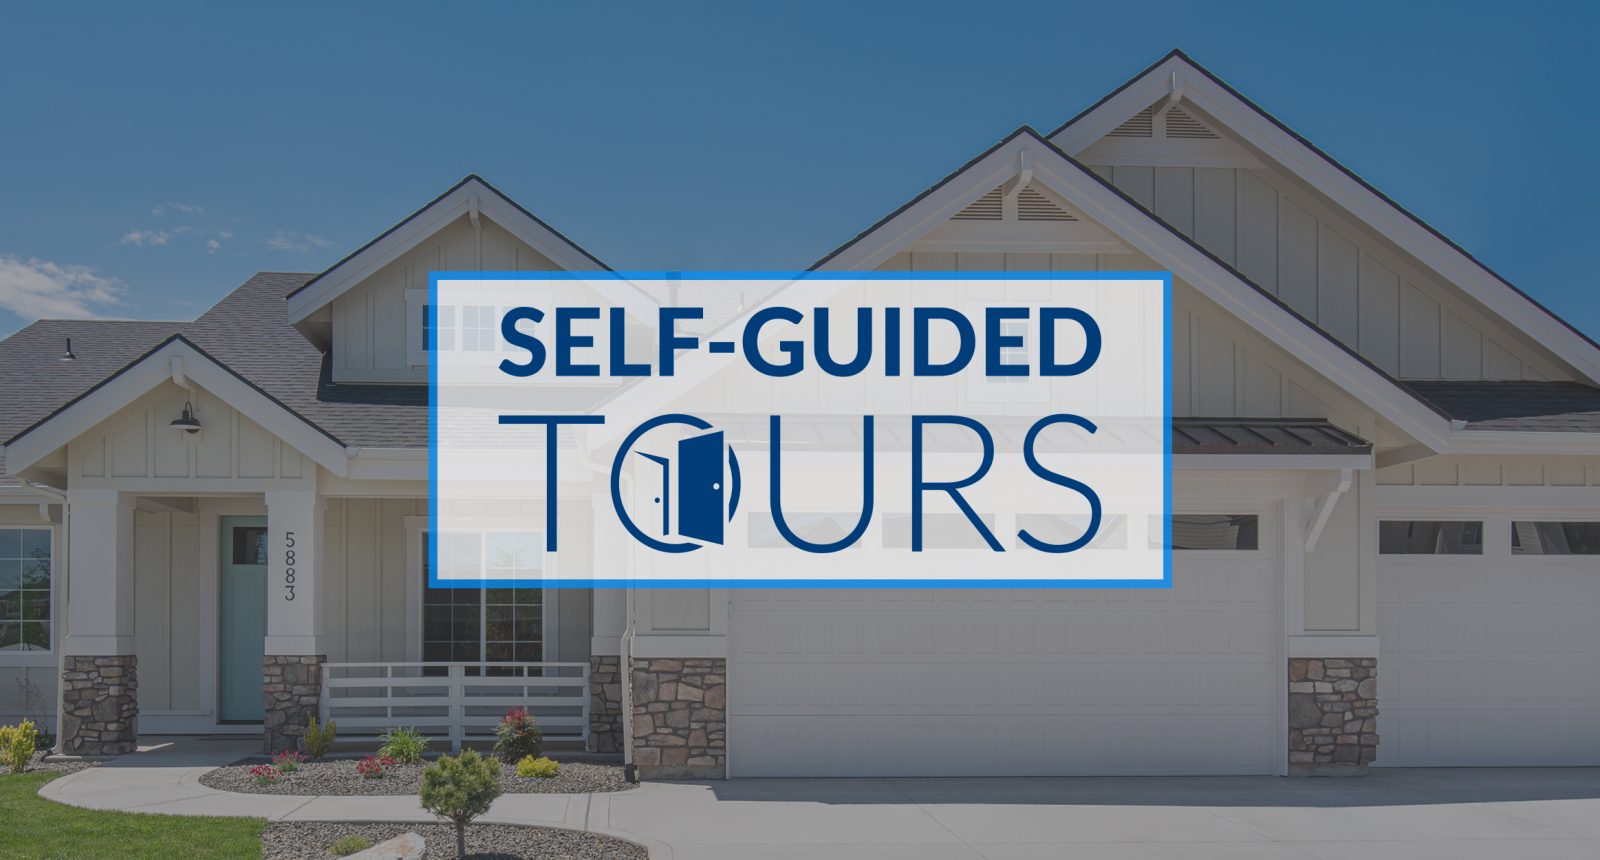 SELF-GUIDED TOURS